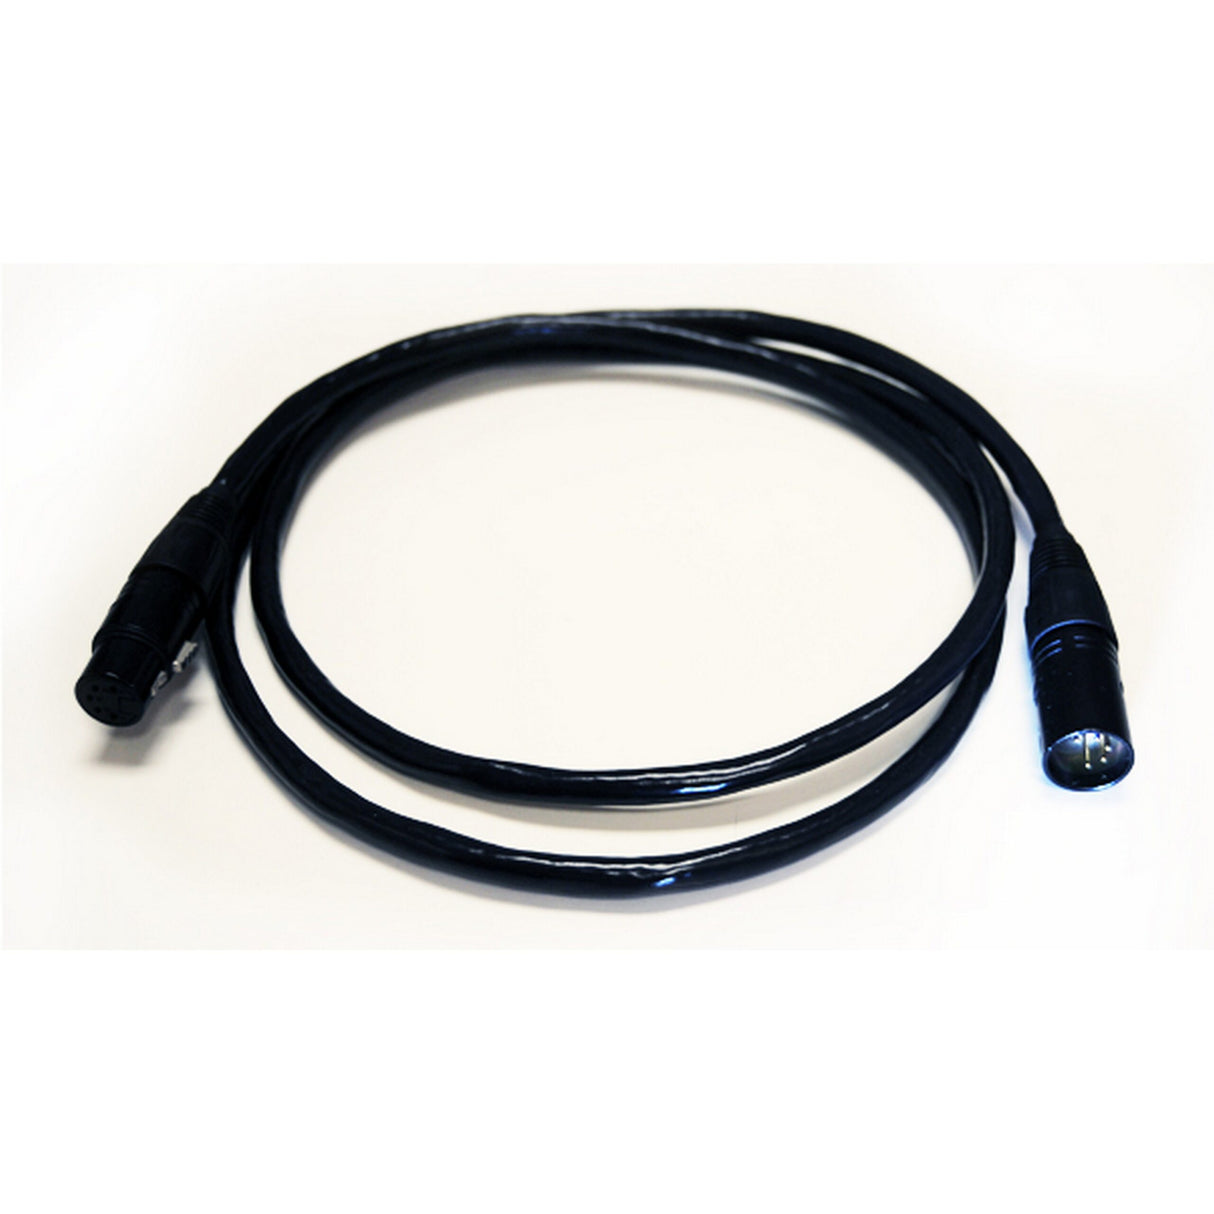 Whirlwind DMX10 DMX 5-Pin XLRF to XLRM Cable, 10-Feet